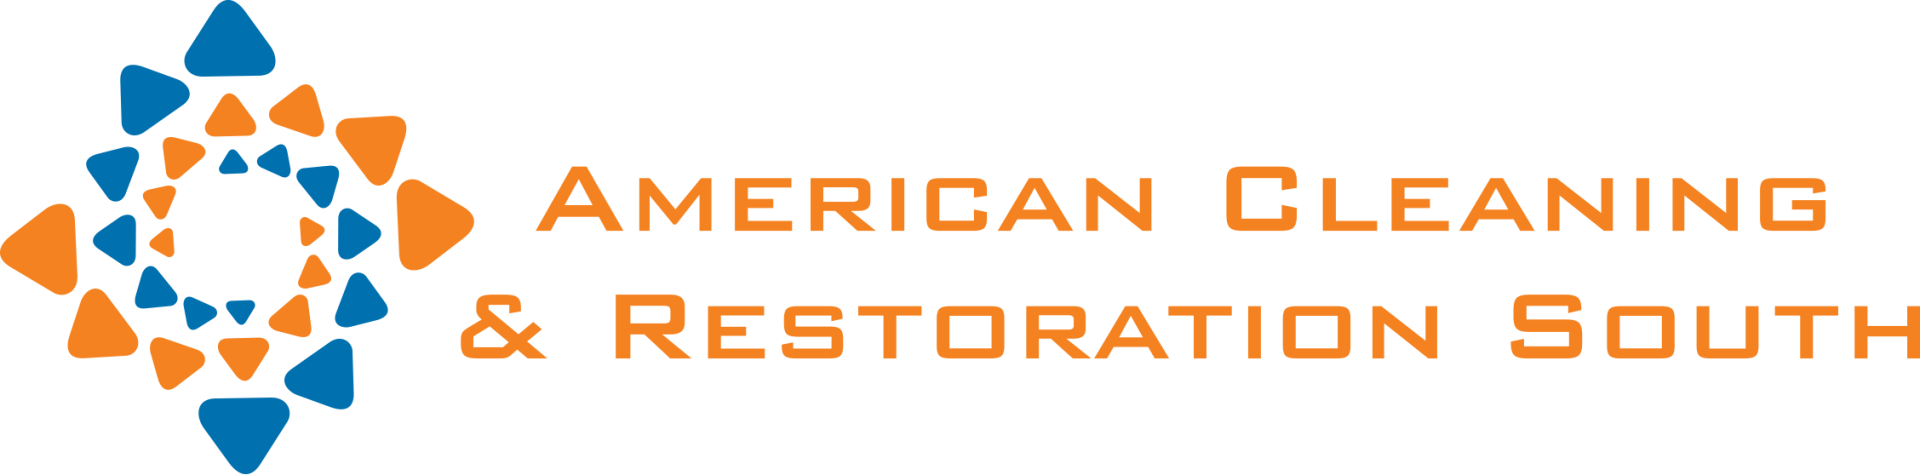 American Cleaning & Restoration South